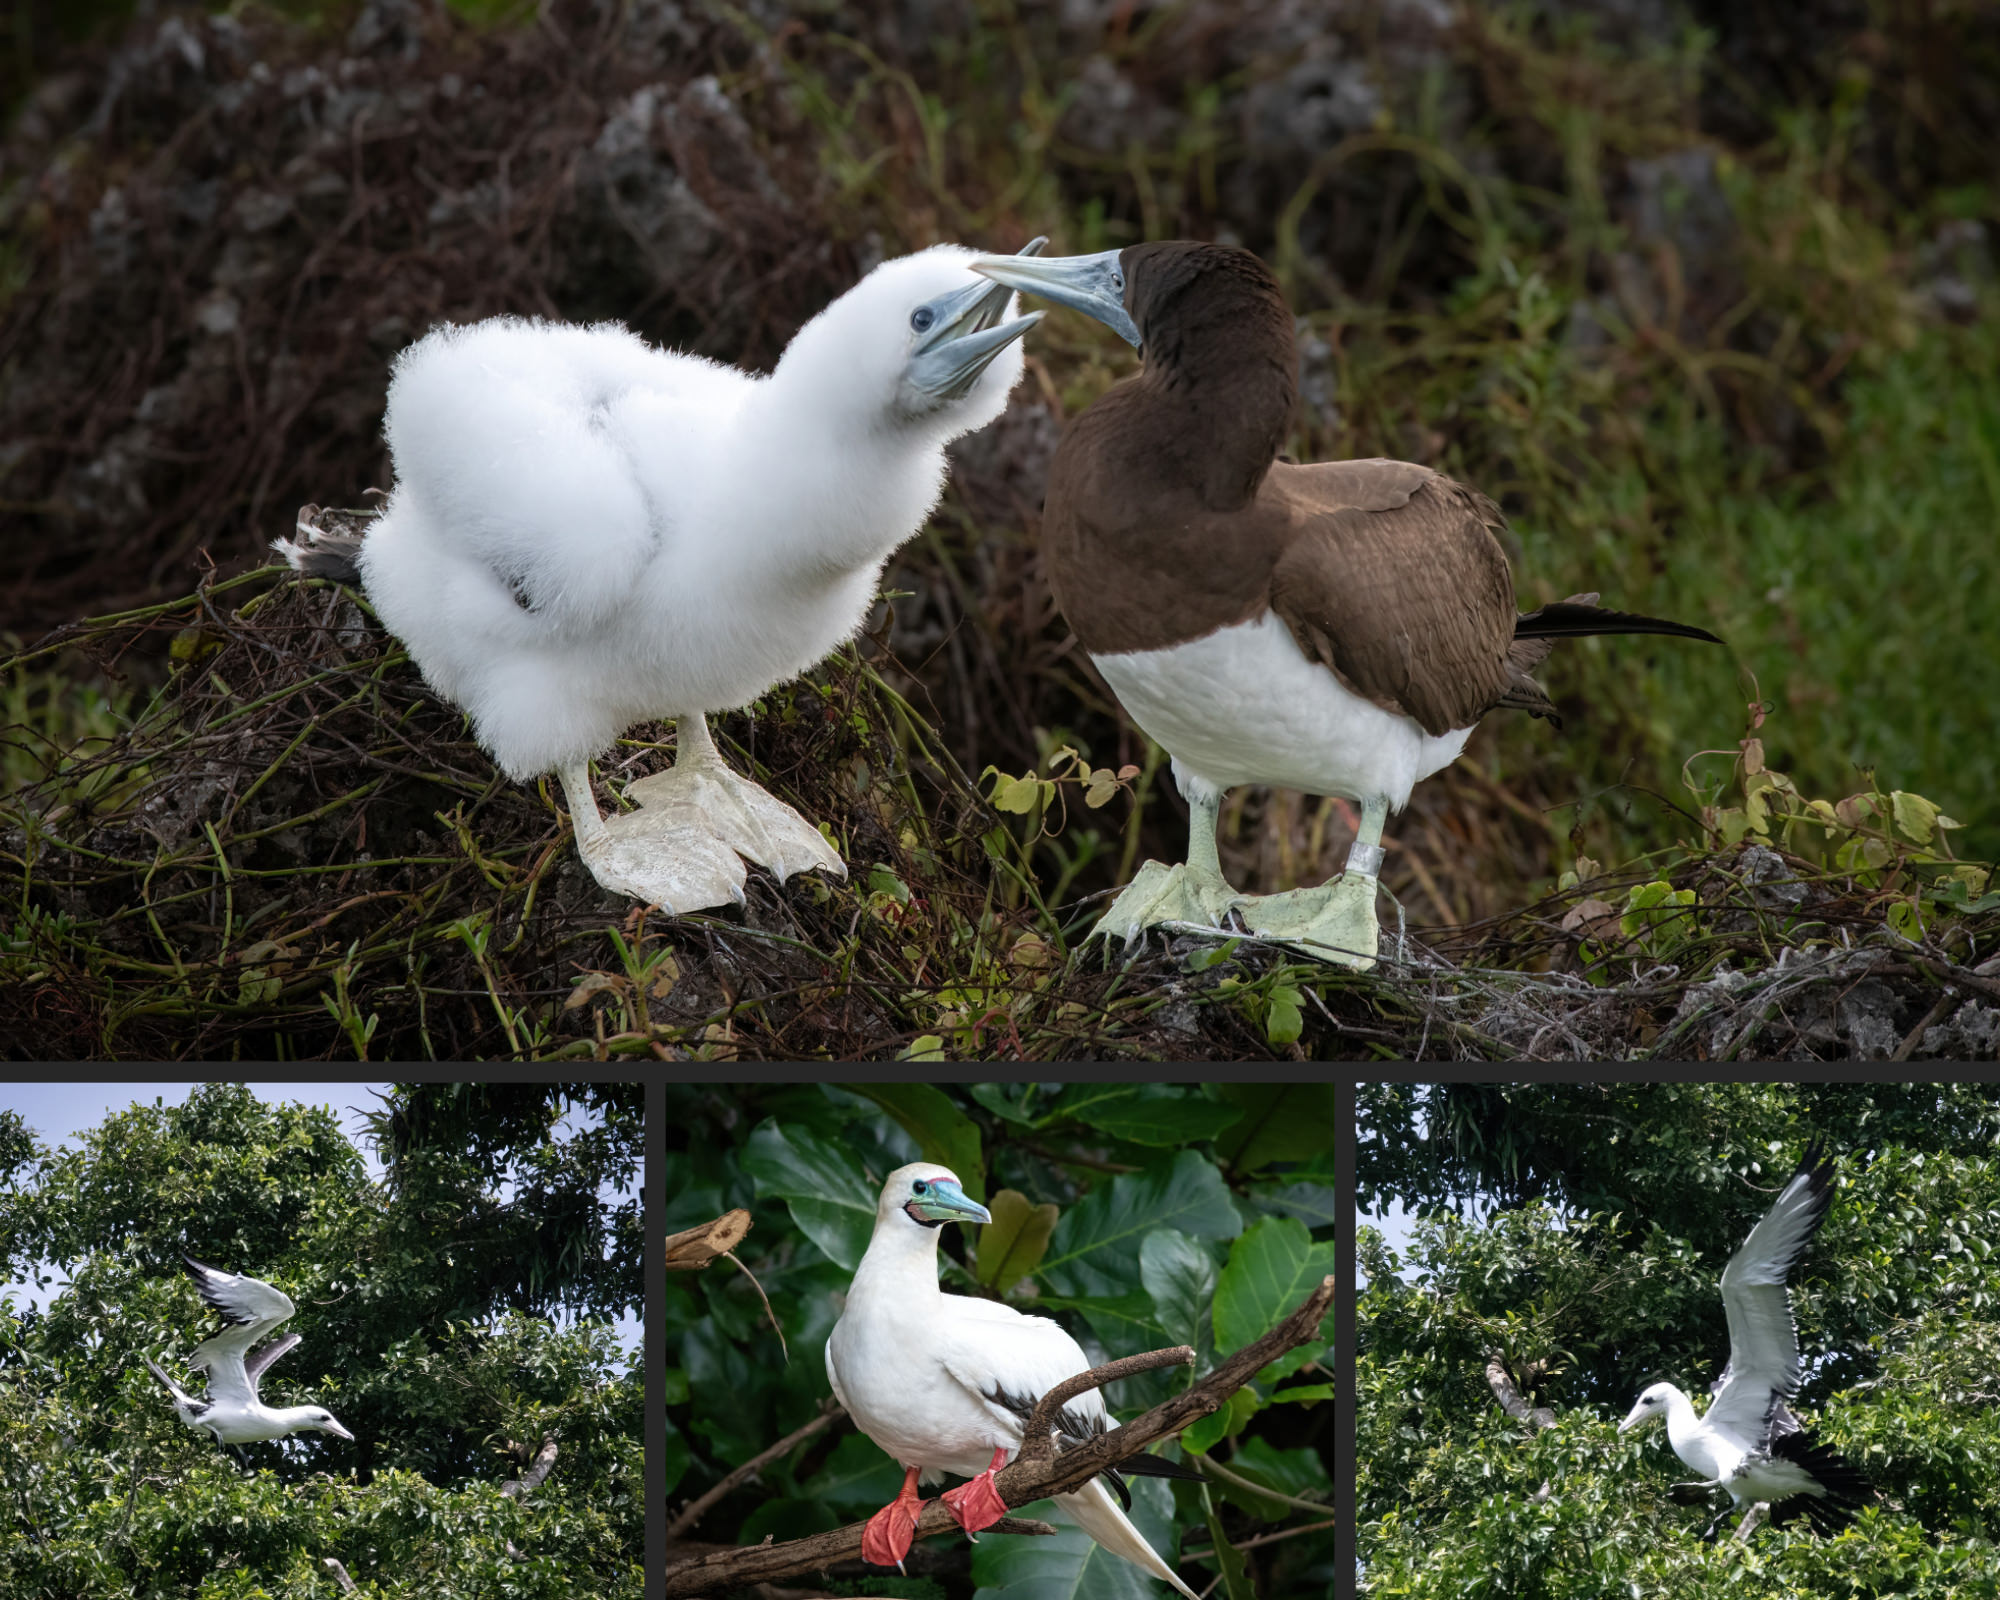 A photocollage of booby birds in flight or resting on tree branches or with a chick on a nest